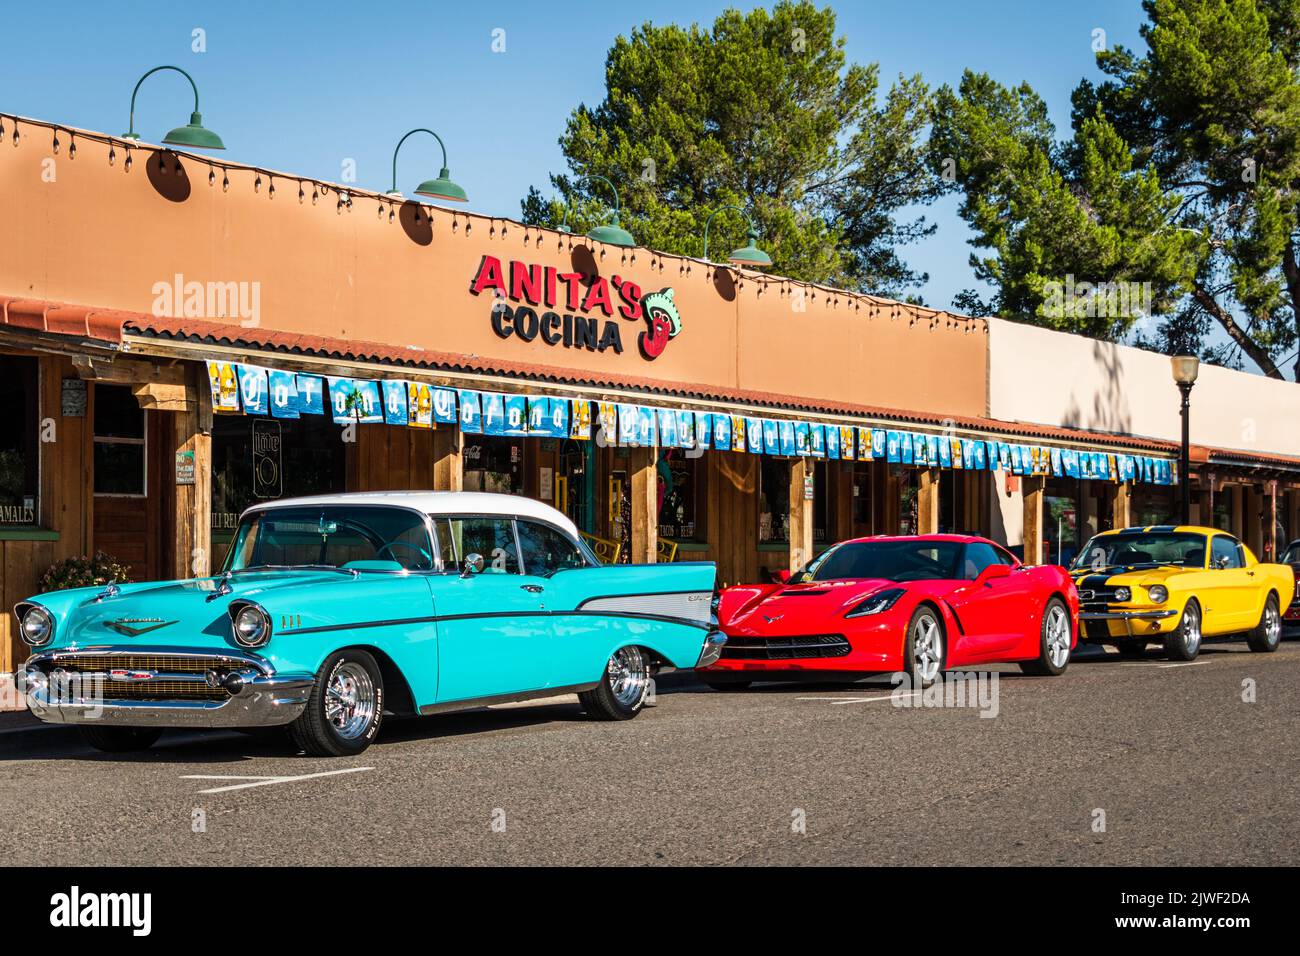 Light blue 1957 Chevrolet Bel Air, Red Corvette Stingray, Yellow Ford Mustang parked in front of Anita's Cocina Mexican Restaurant in Wickenburg, Ariz Stock Photo